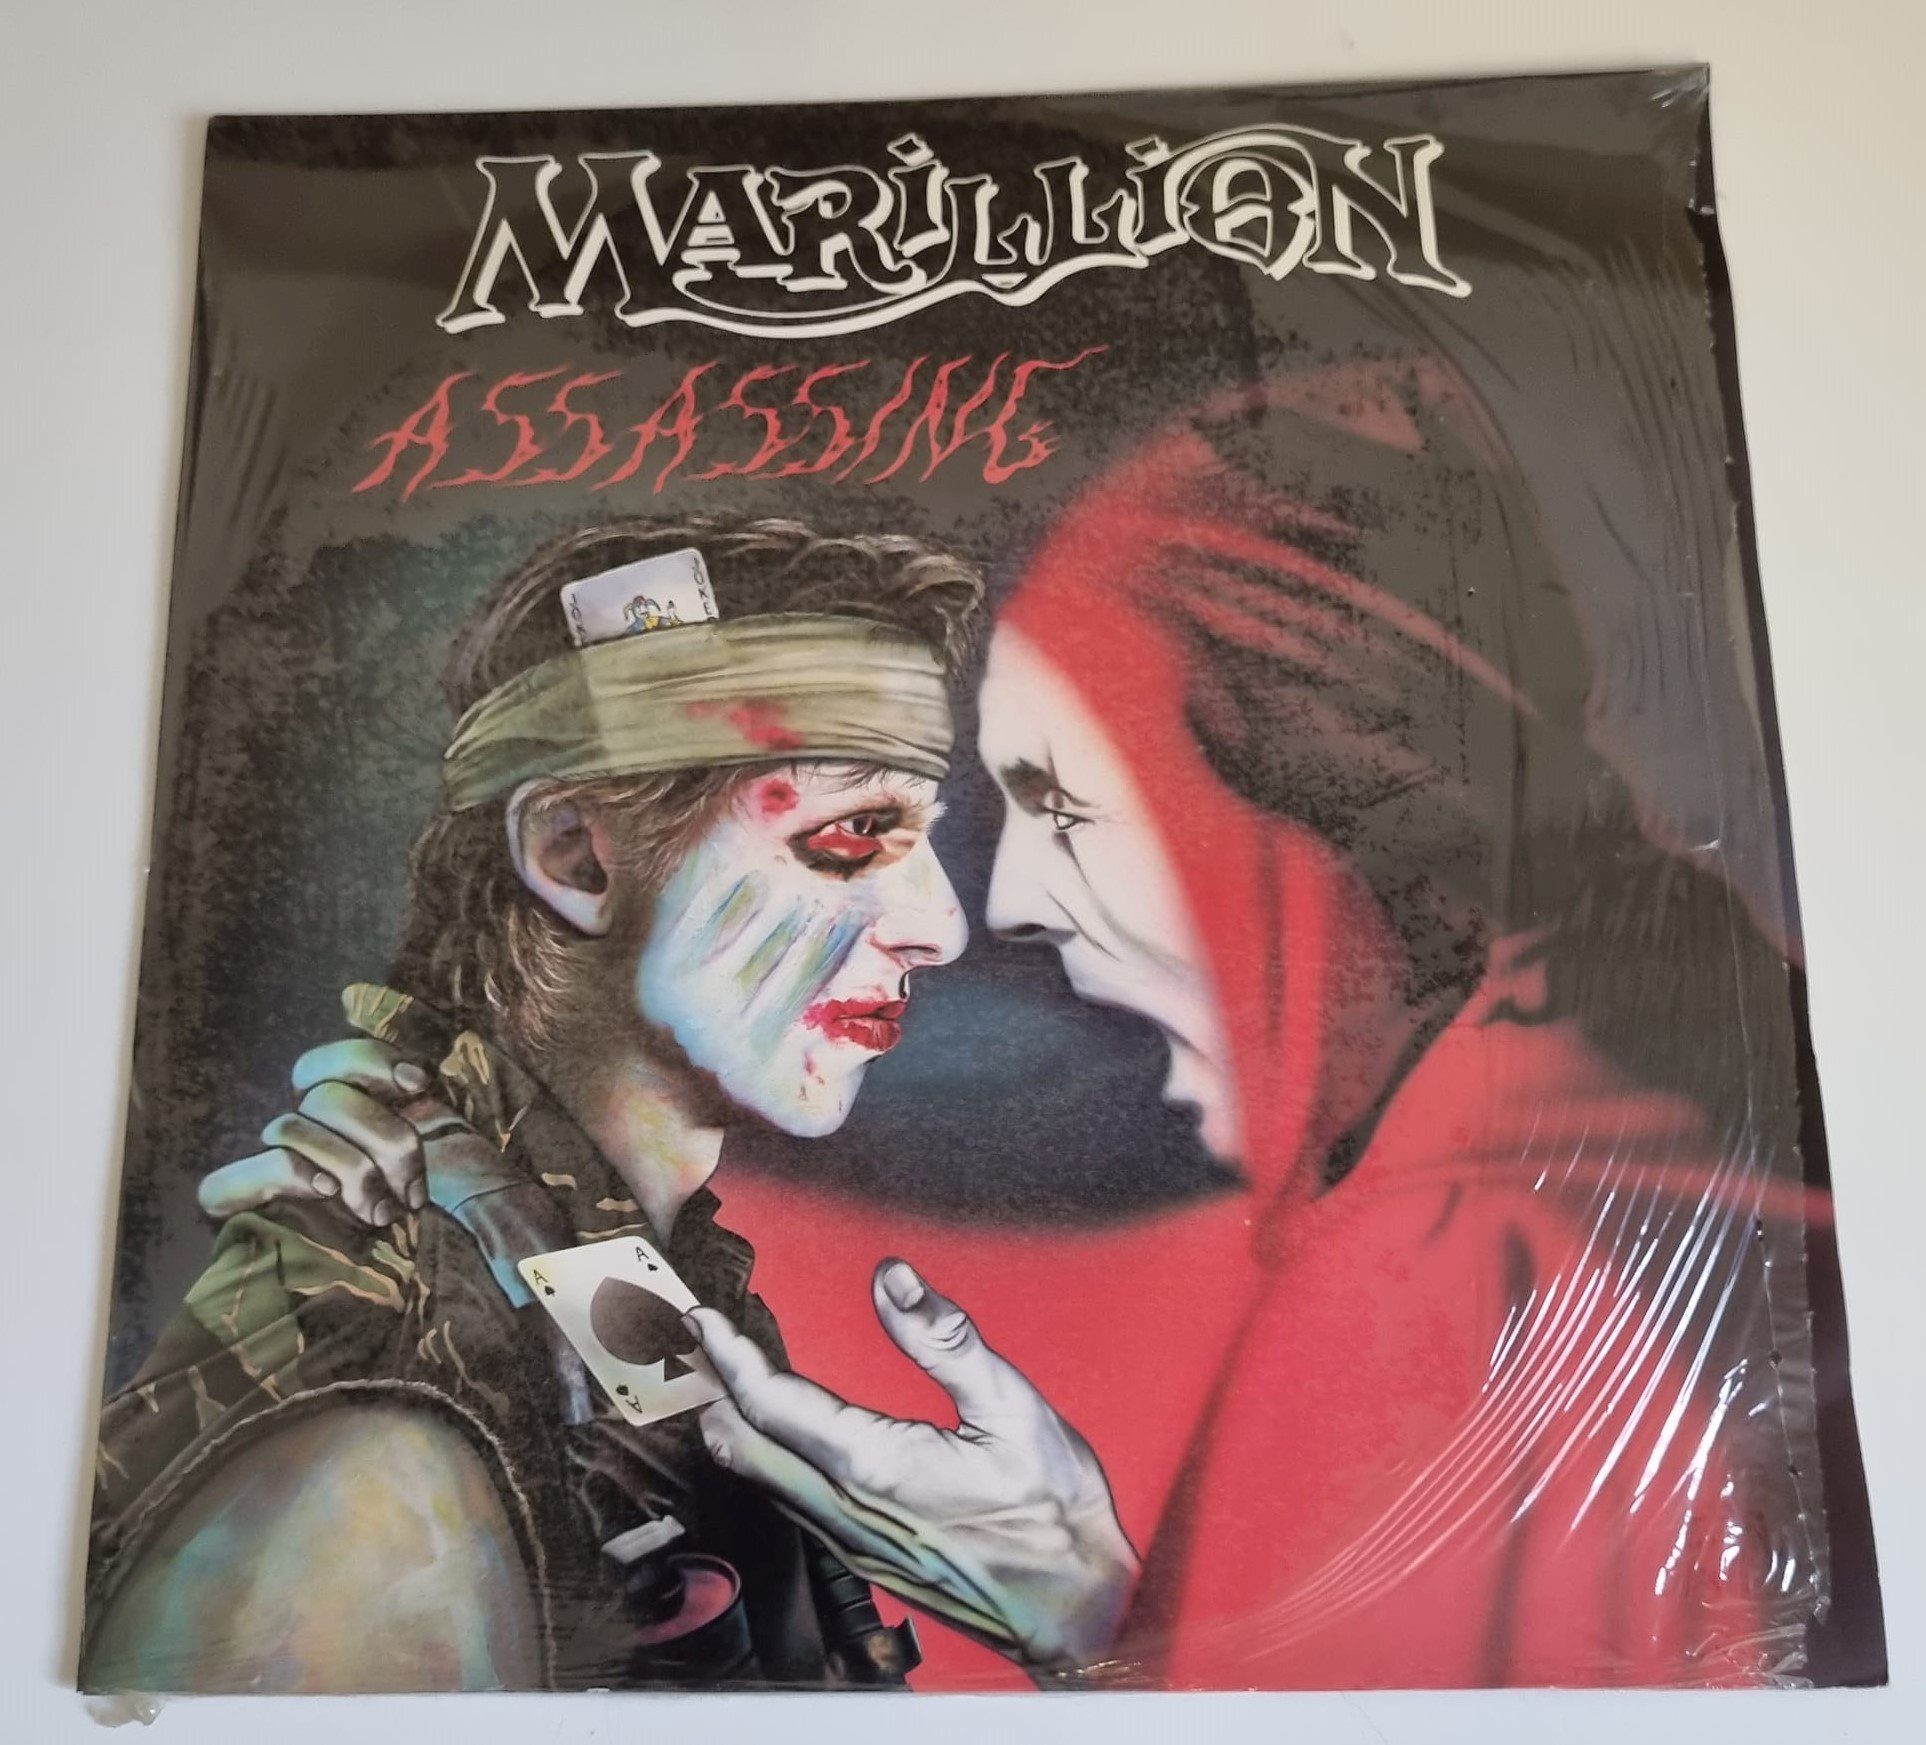 Buy this rare Marillion record by clicking here